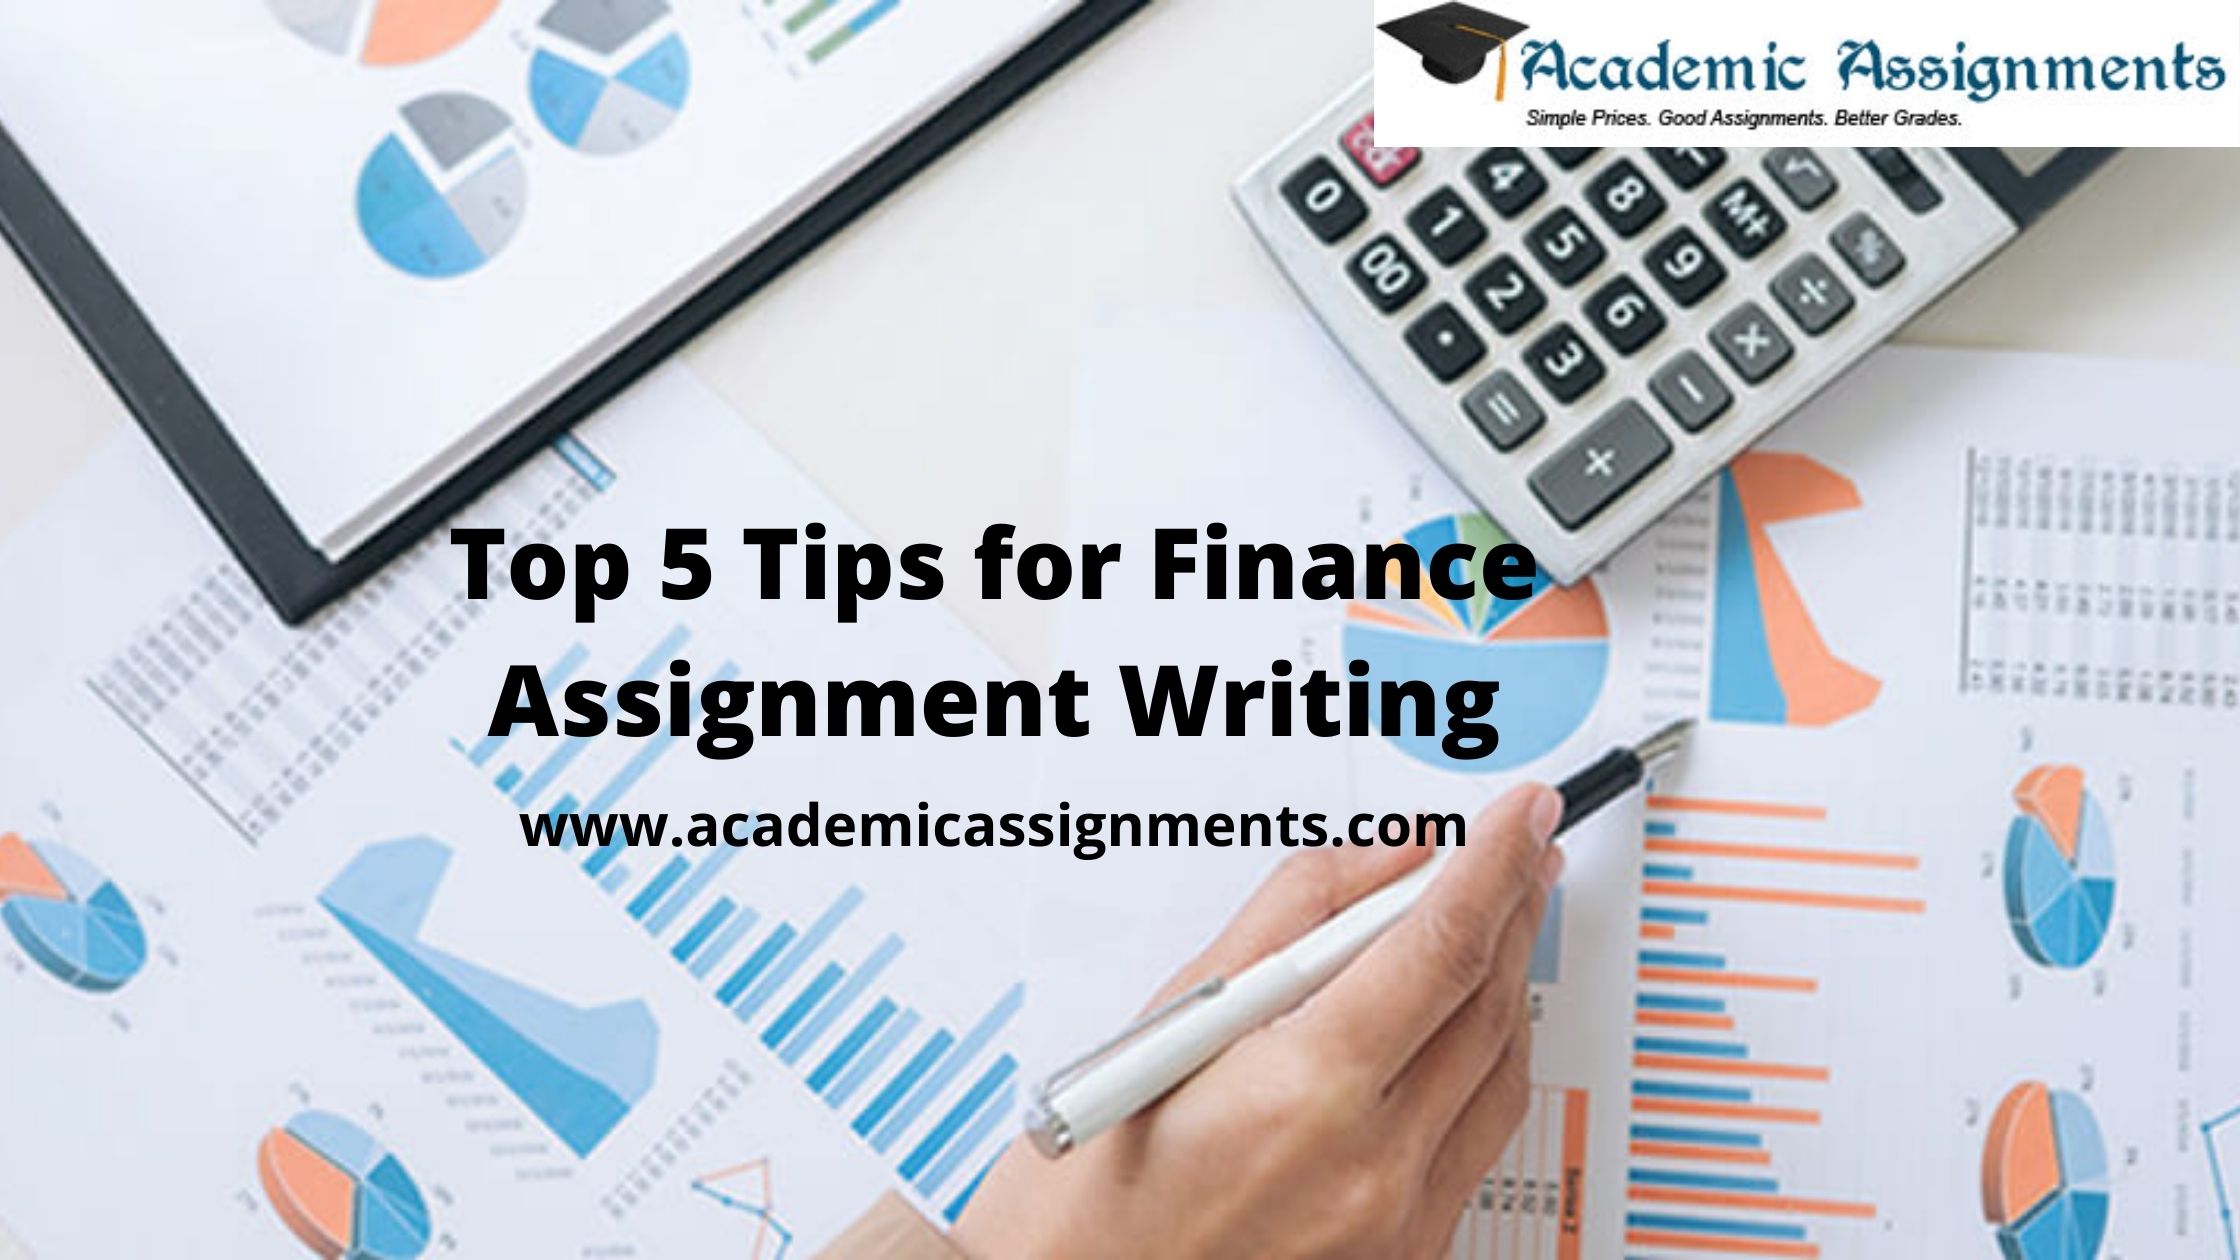 Top 5 Tips for Finance Assignment Writing